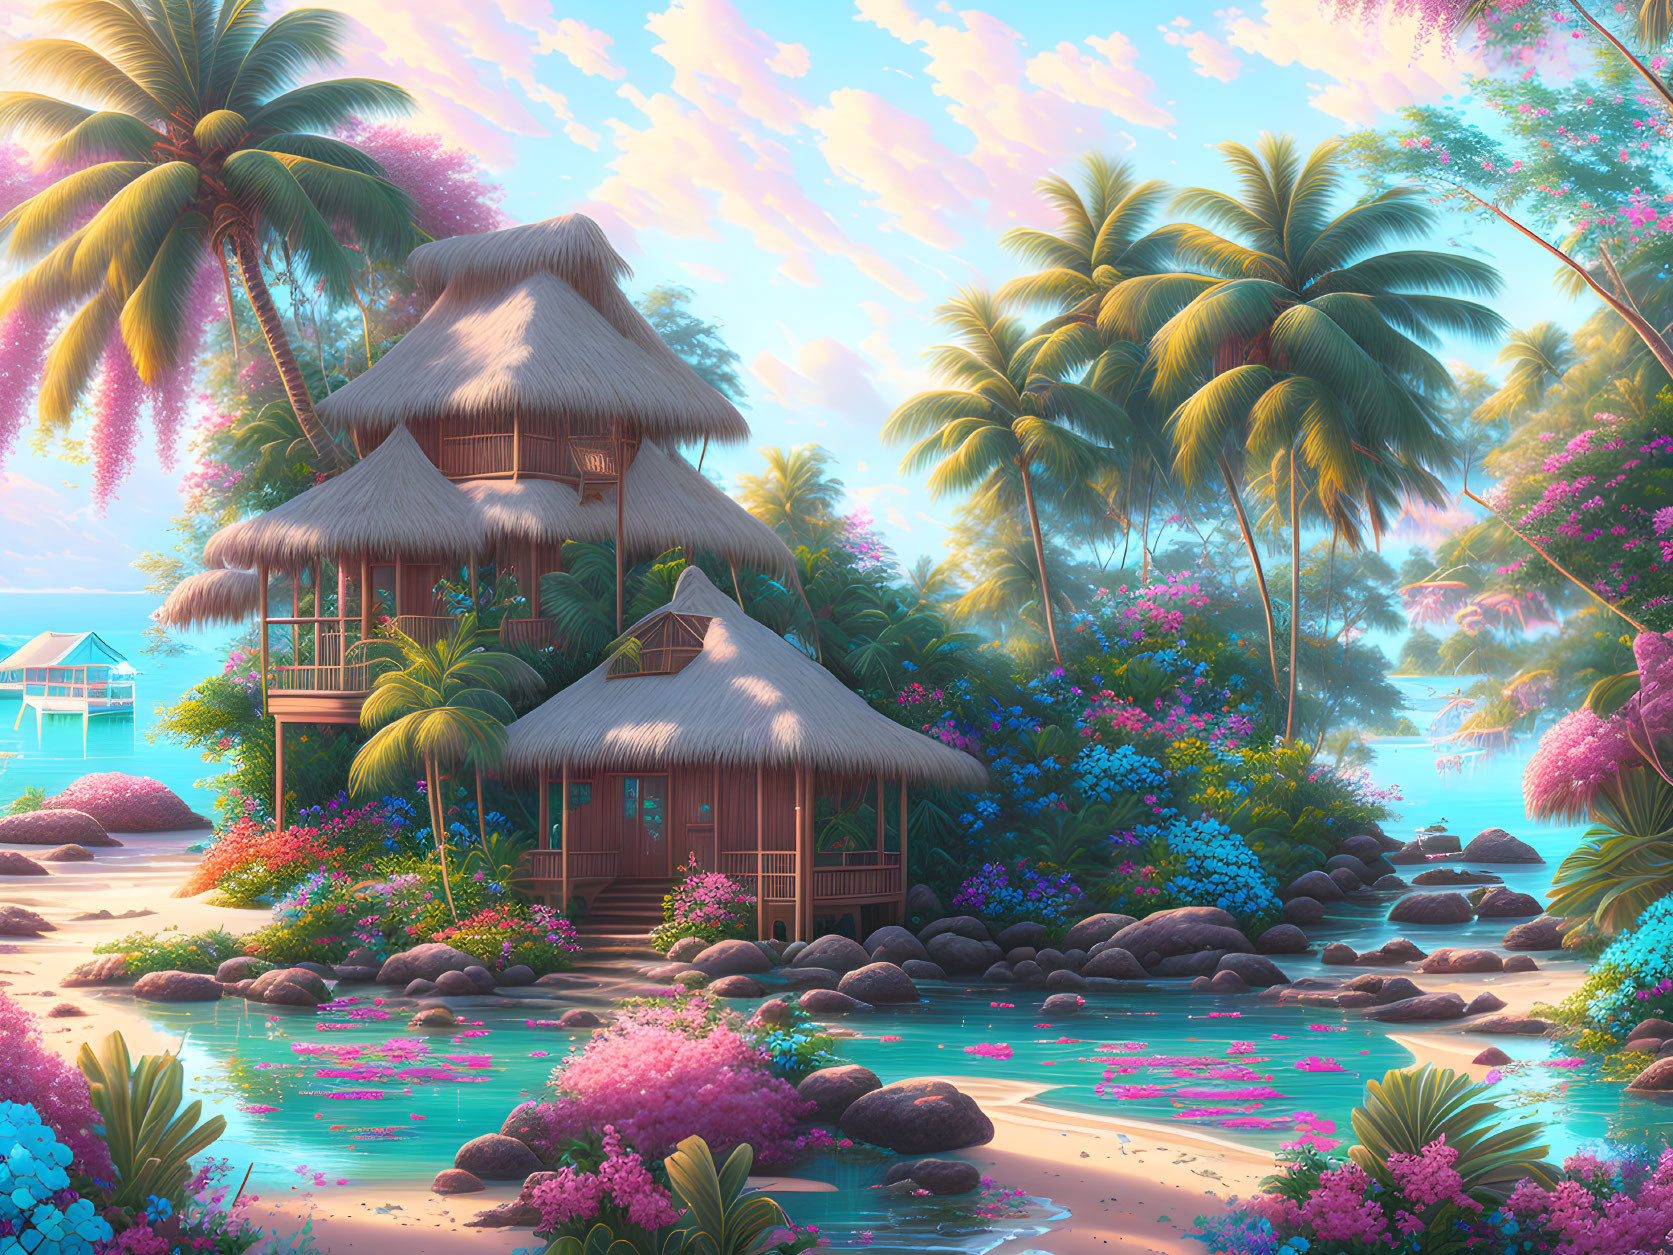 Tropical landscape with palm trees, thatched huts, lagoon, and colorful flora